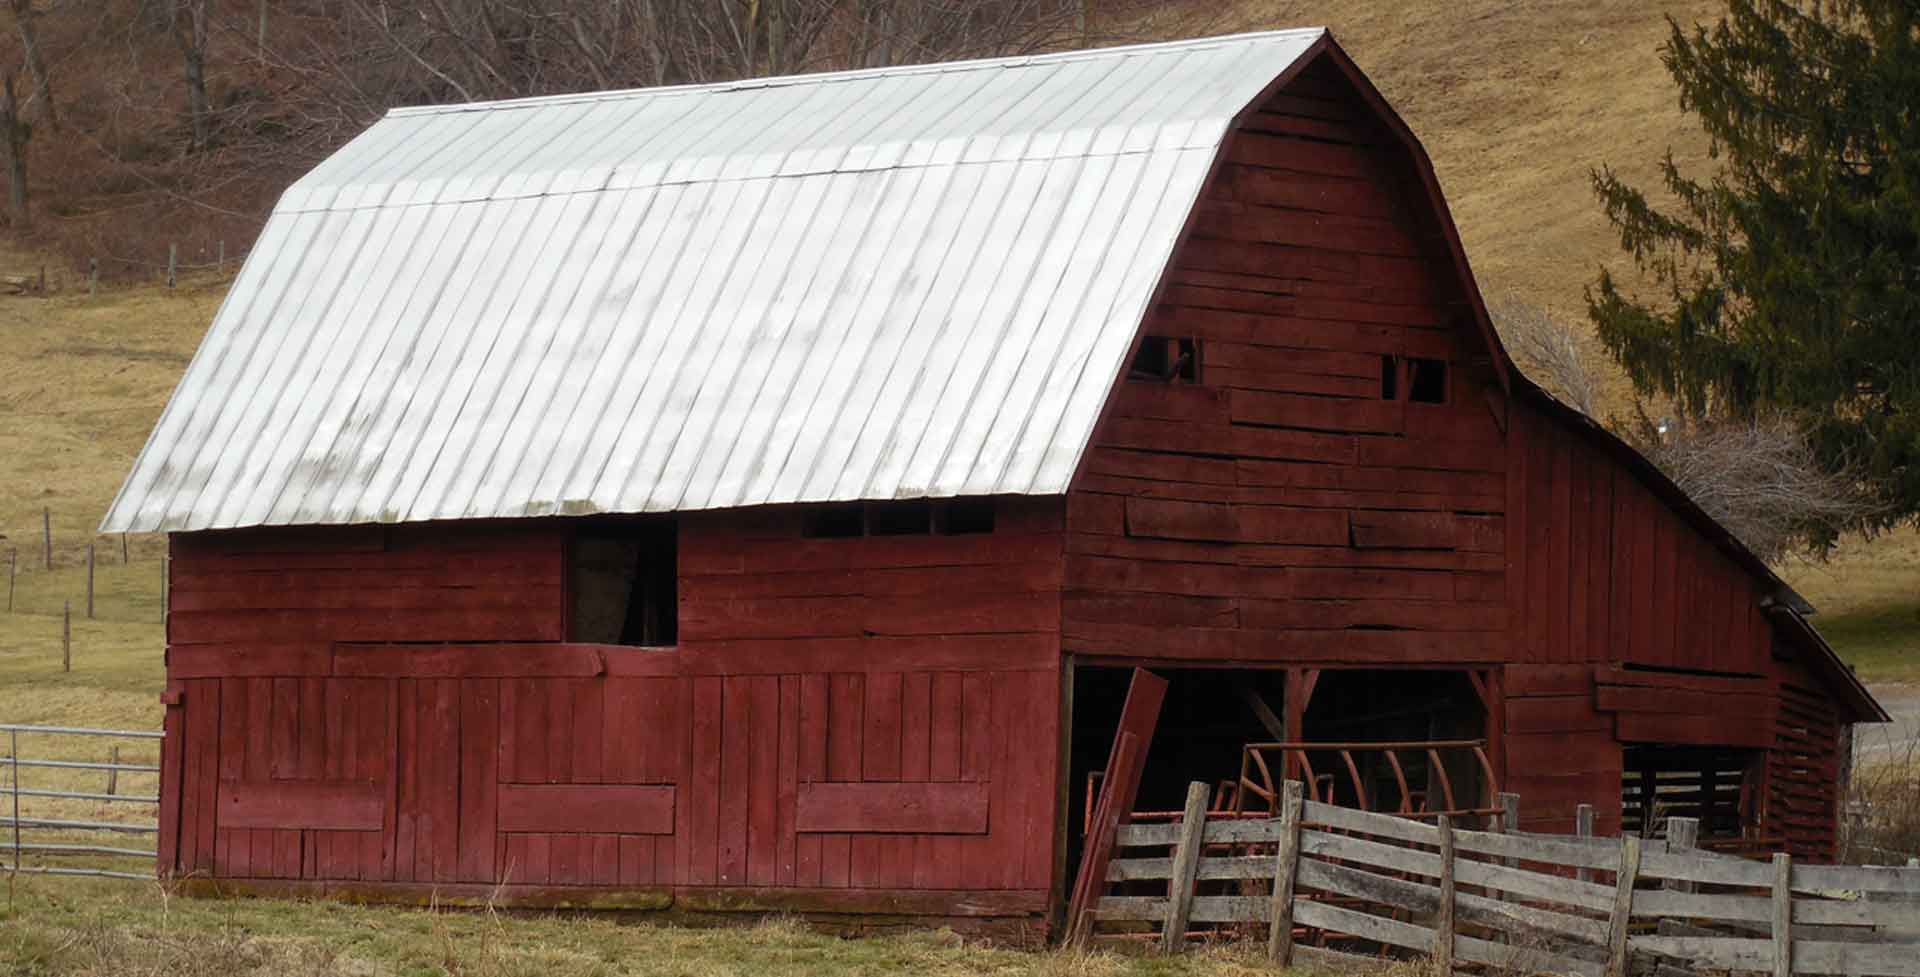 An old red barn with a metal roof.